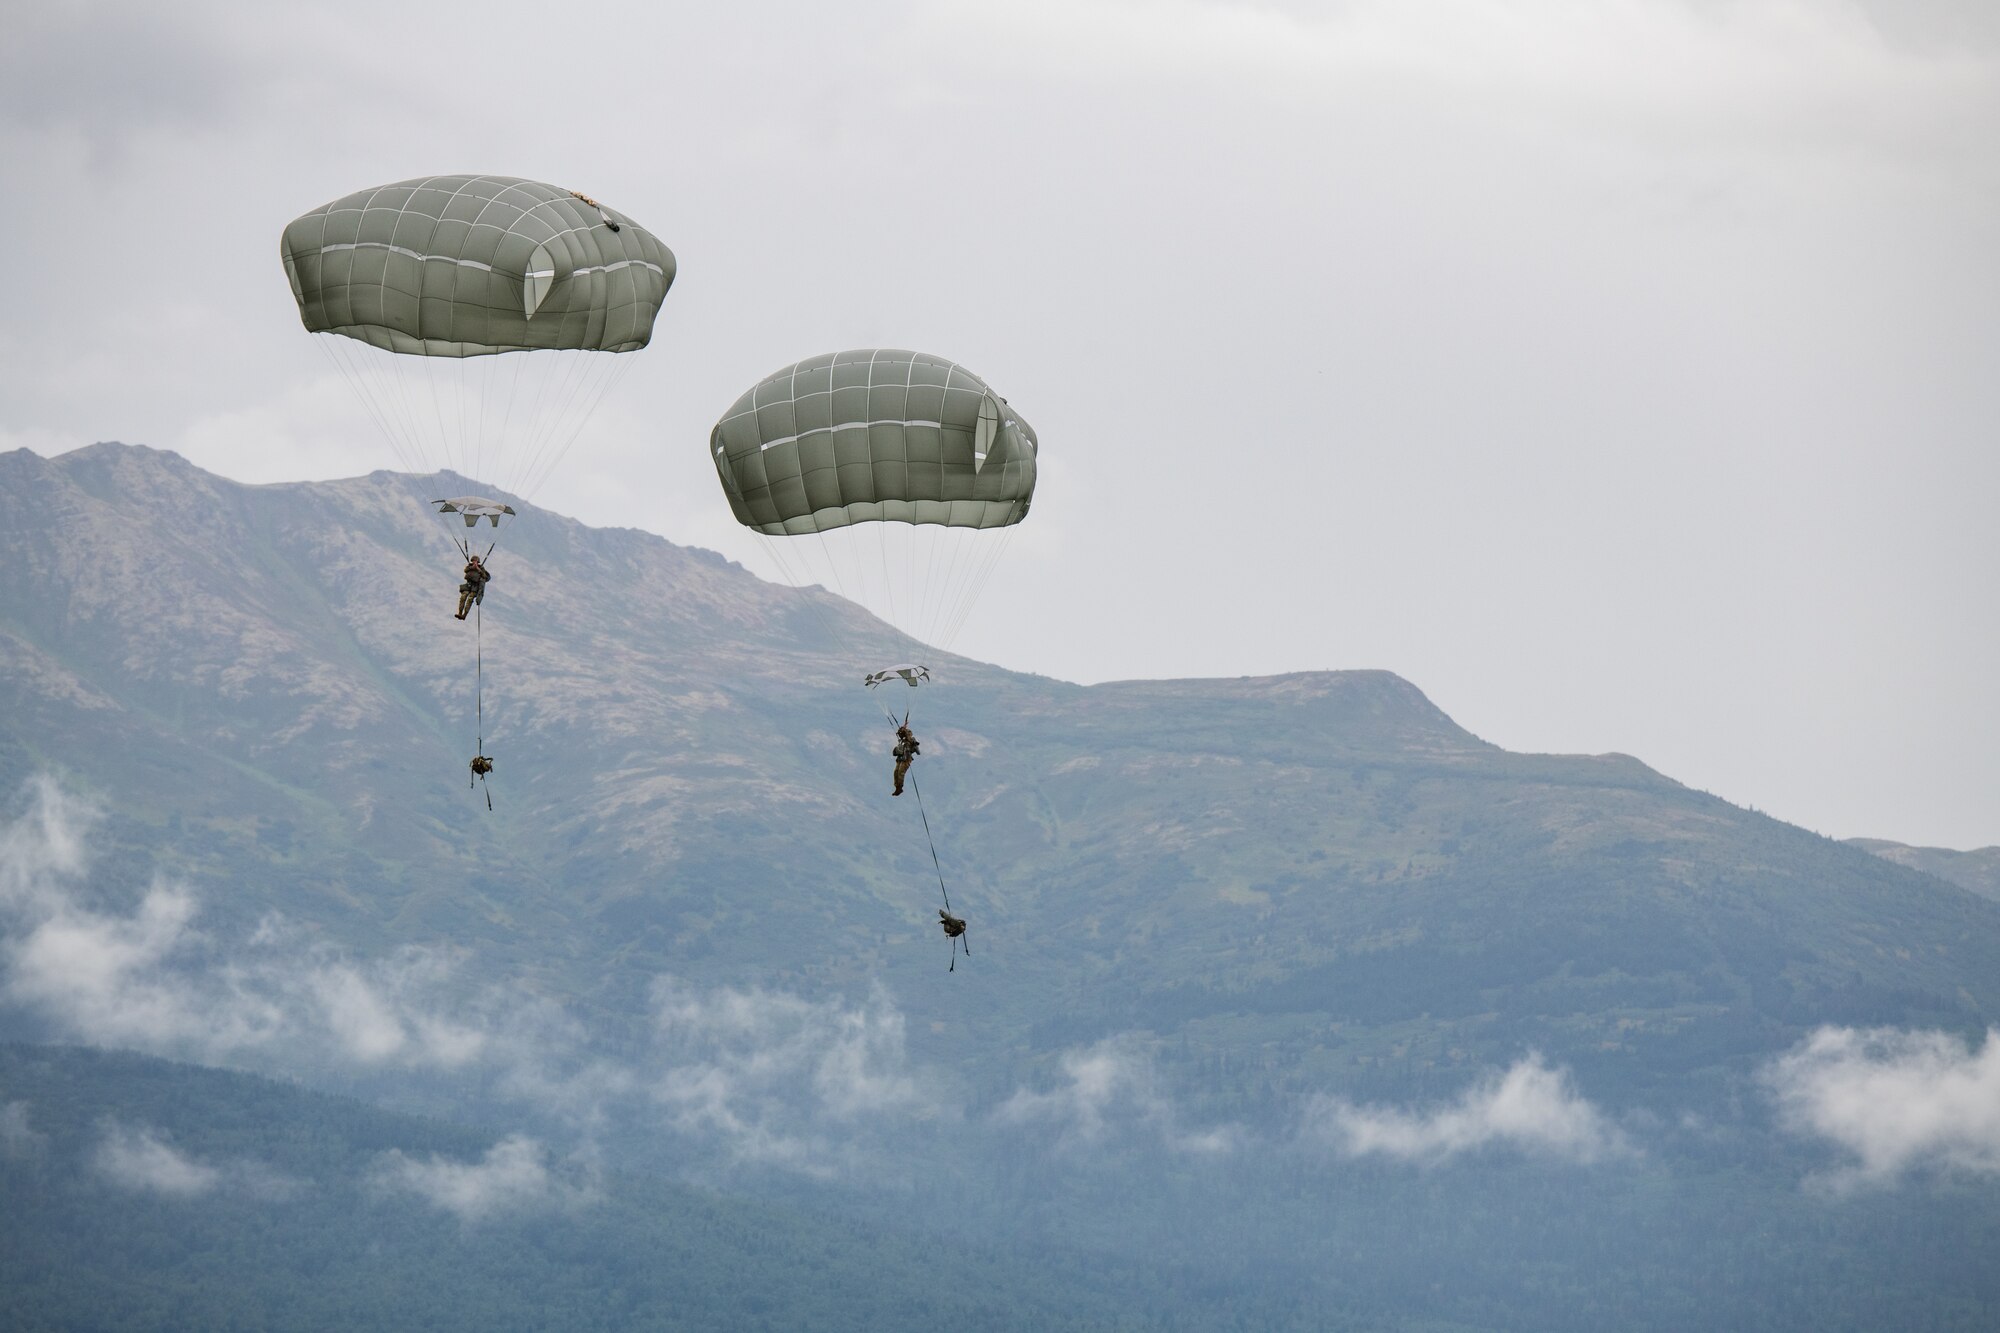 Soldiers use parachutes to descend after airborne operations.